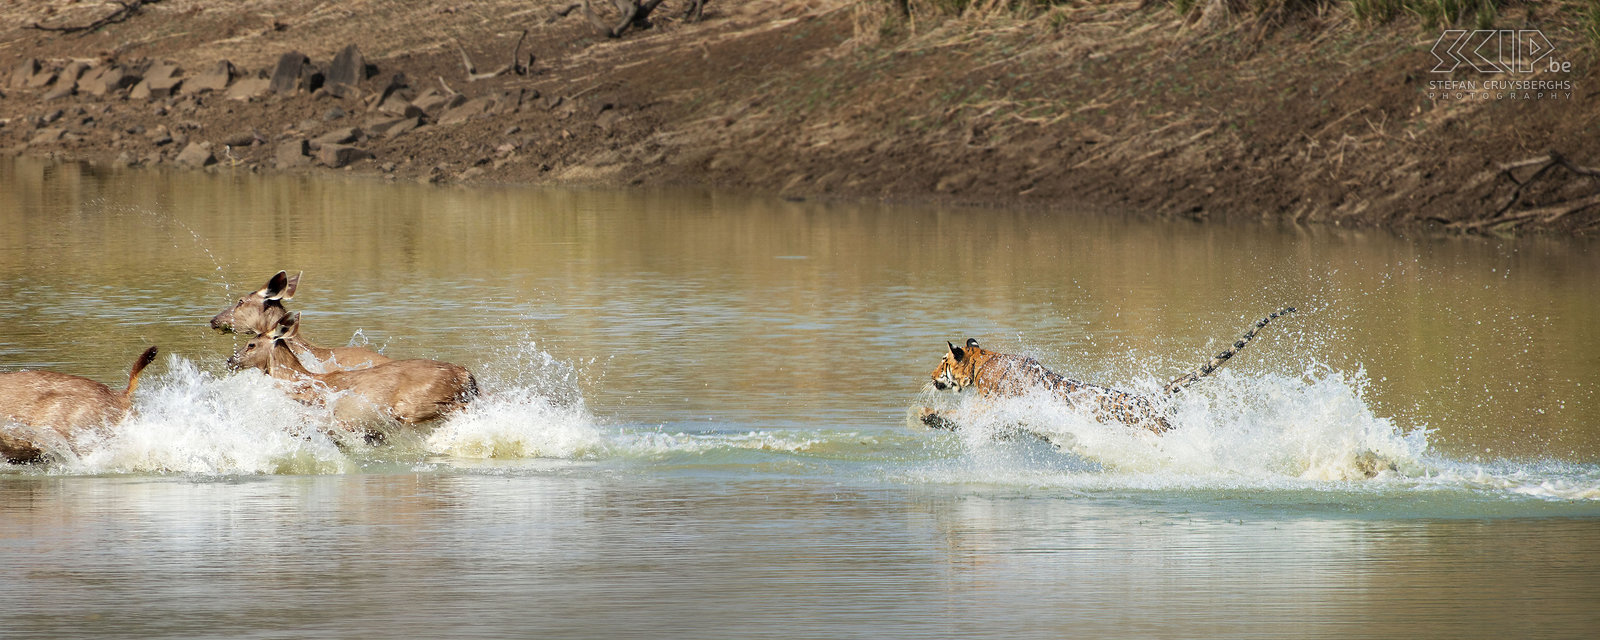 Tadoba - Tiger attack Perhaps due to the tiger's splashing the deer get plenty of notice and run to the nearest bank to escape. The 3 deers got away but I had some wonderful action shots. It was a thrilling moment and we had been extremely lucky to see a Bengal tiger hunting in the water.  Stefan Cruysberghs